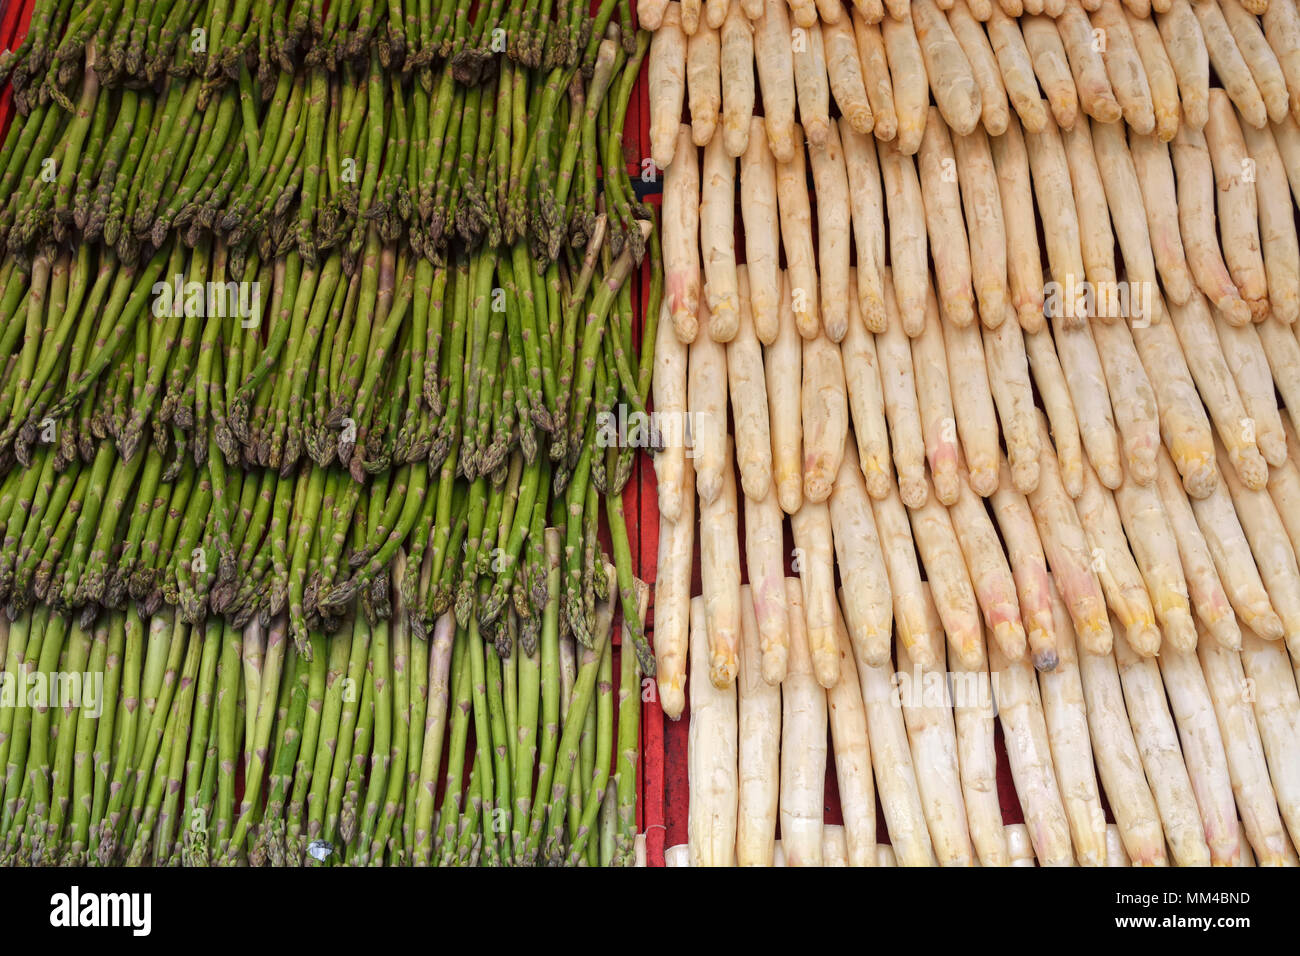 Wild asparagus and cultivated asparagus (at right) in the Hotorget street food market. Stockholm, Sweden Stock Photo